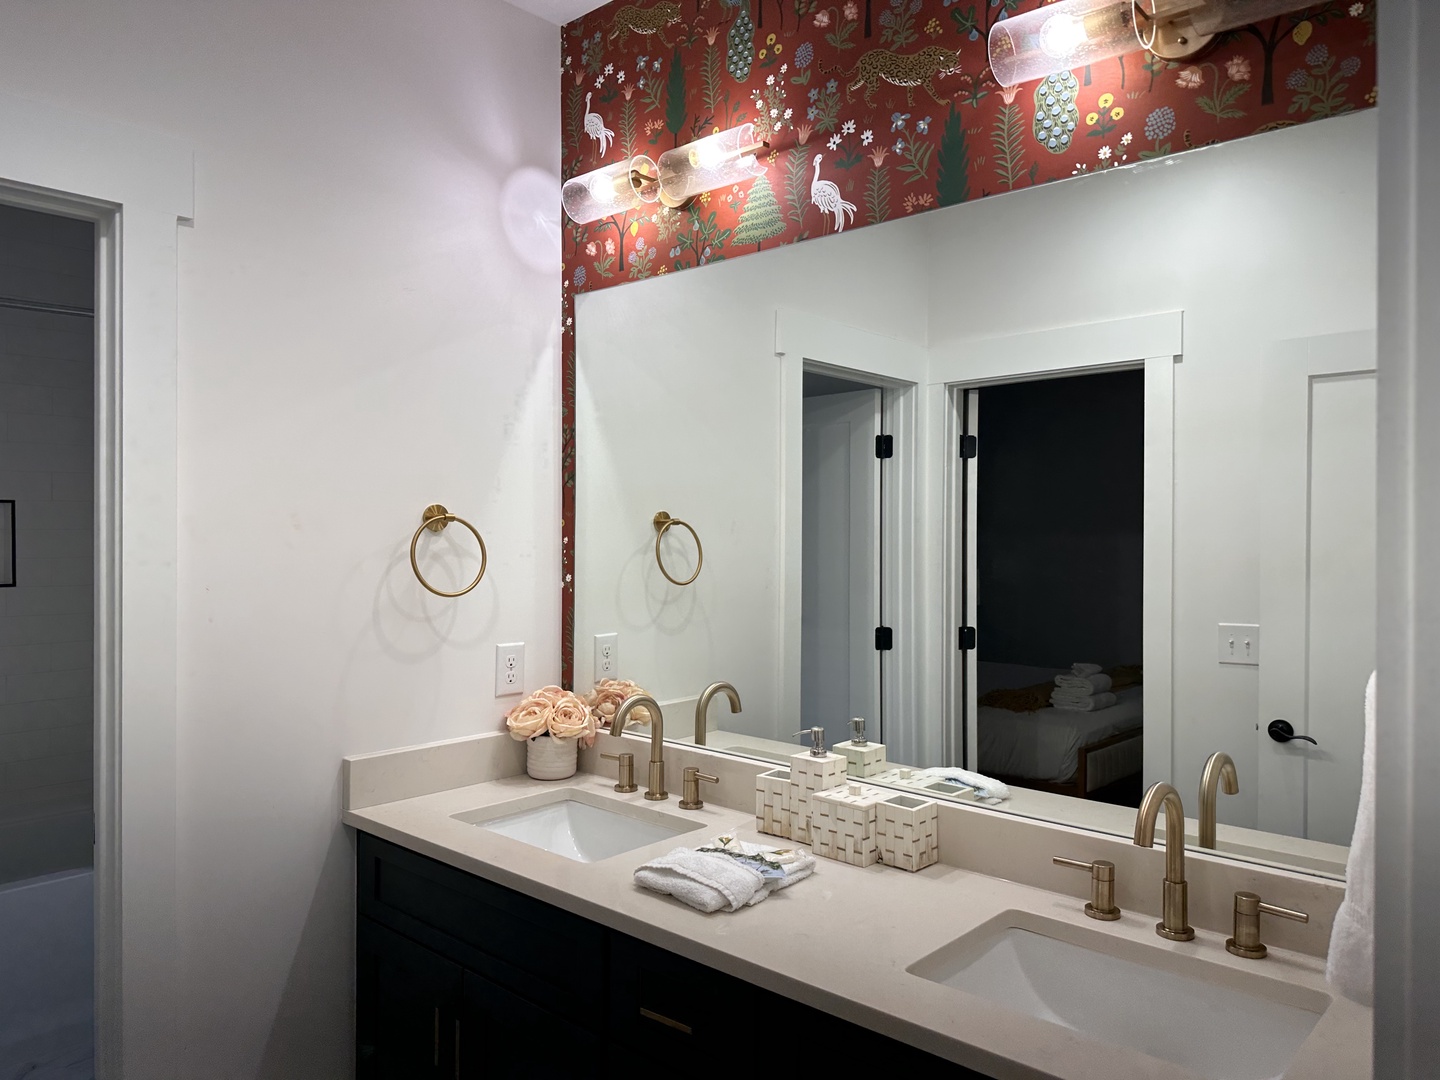 This Jack & Jill bathroom offers a double vanity & shower/tub combo